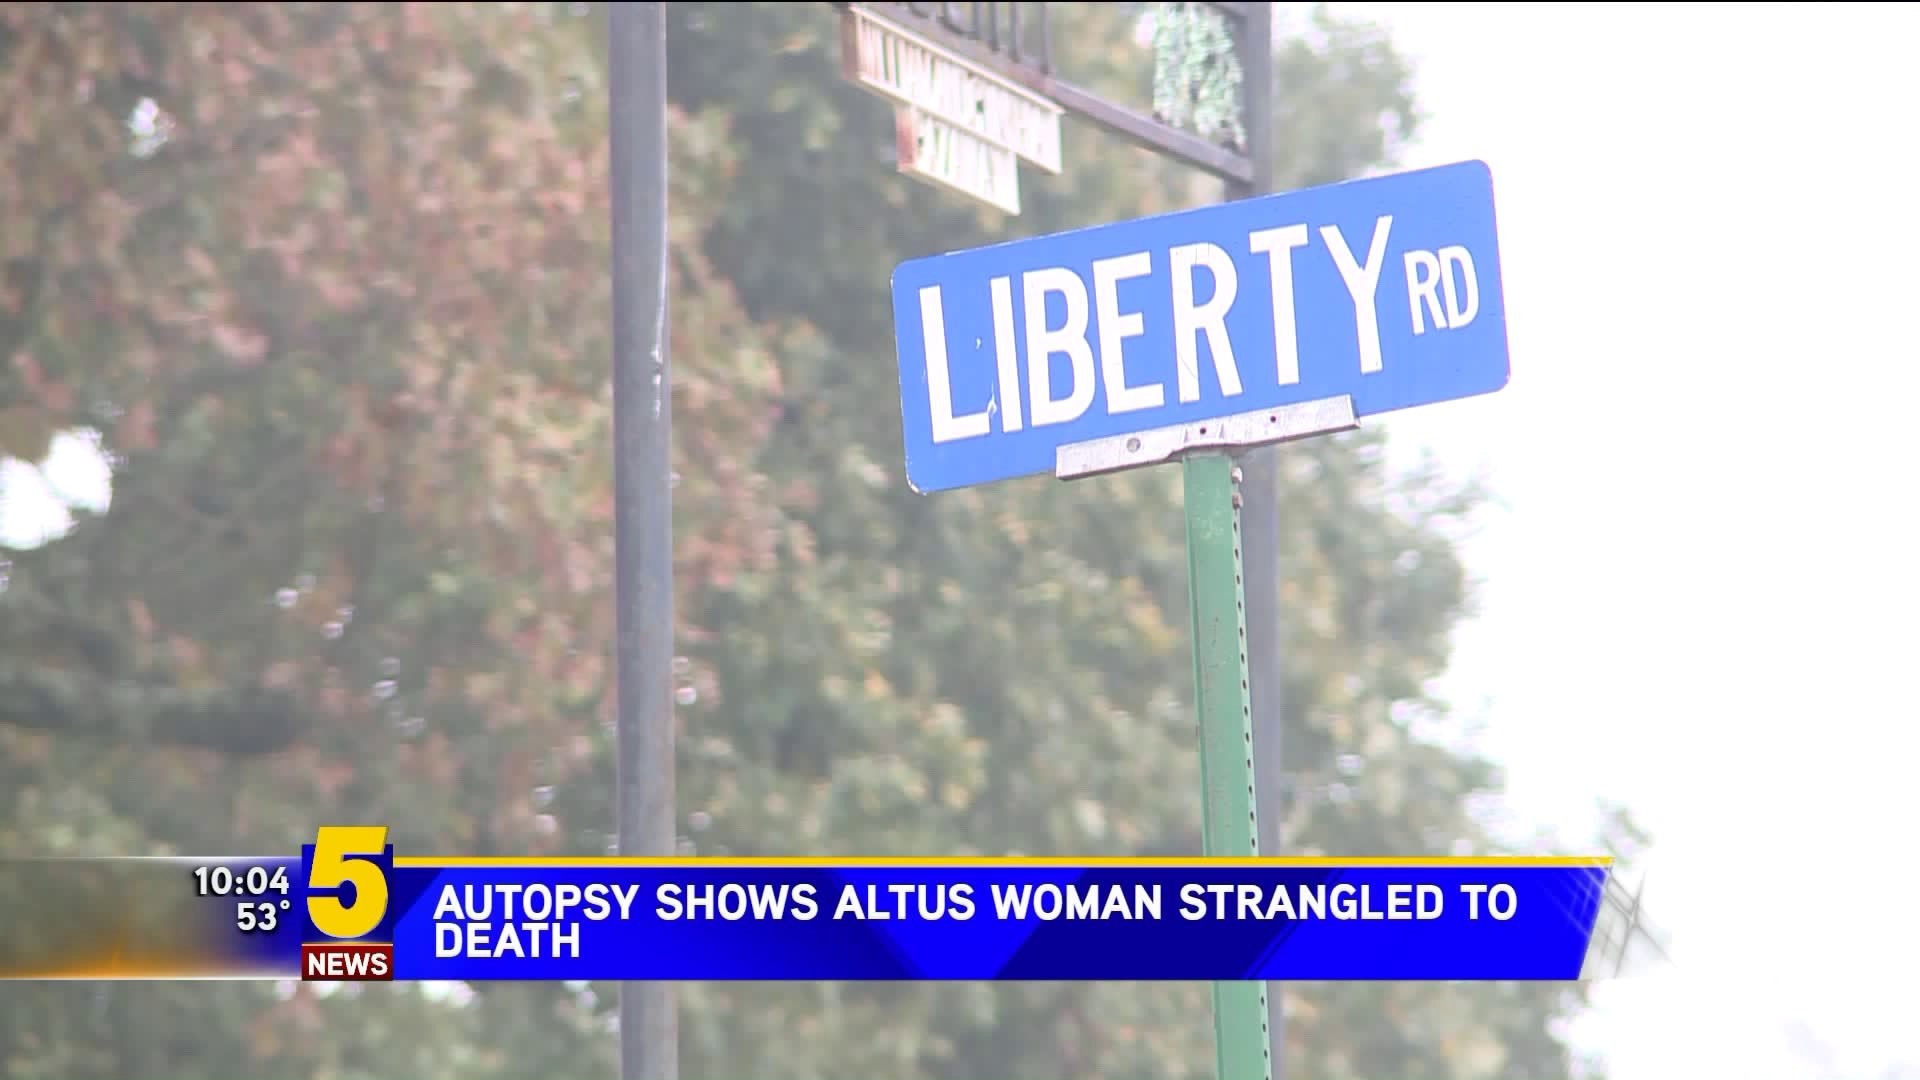 Autopsy Shows Altus Woman Strangled To Death